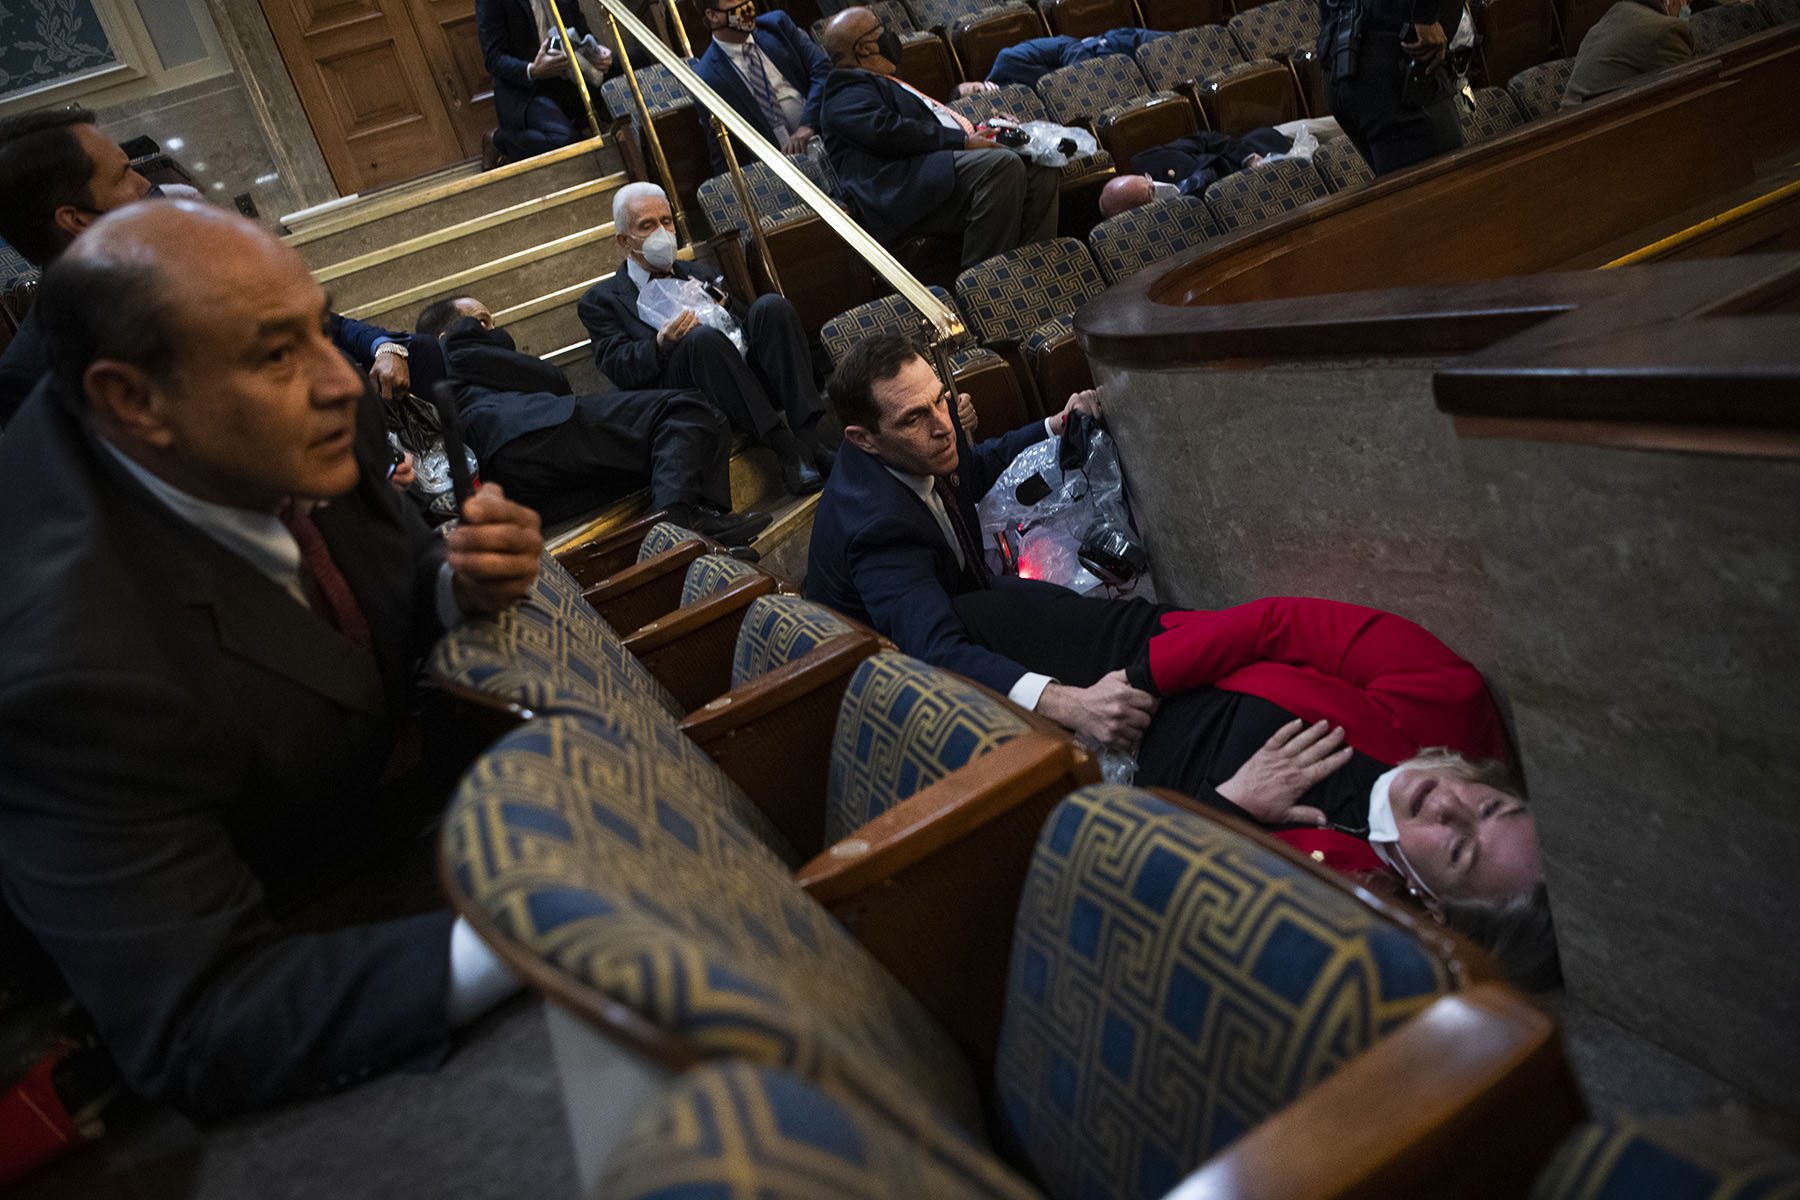 Rep. Susan Wild lays on the floor holding her hand over her heart while Rep. Jason Crow holds her hand to comfort her.